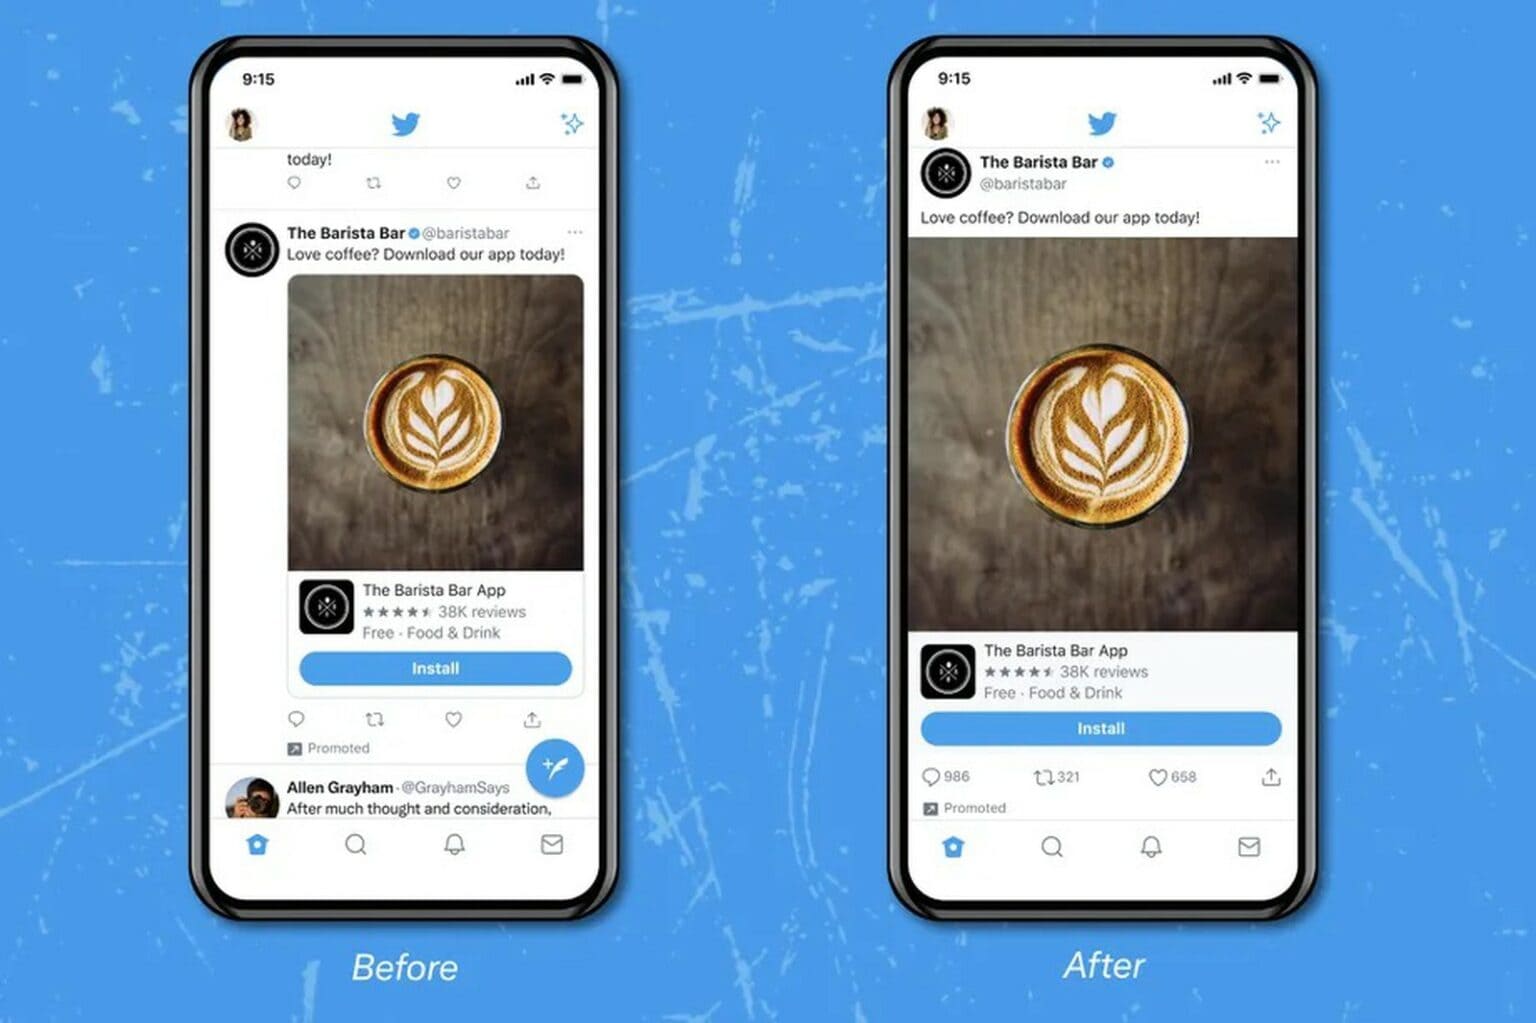 Twitter tests new interface on iOS